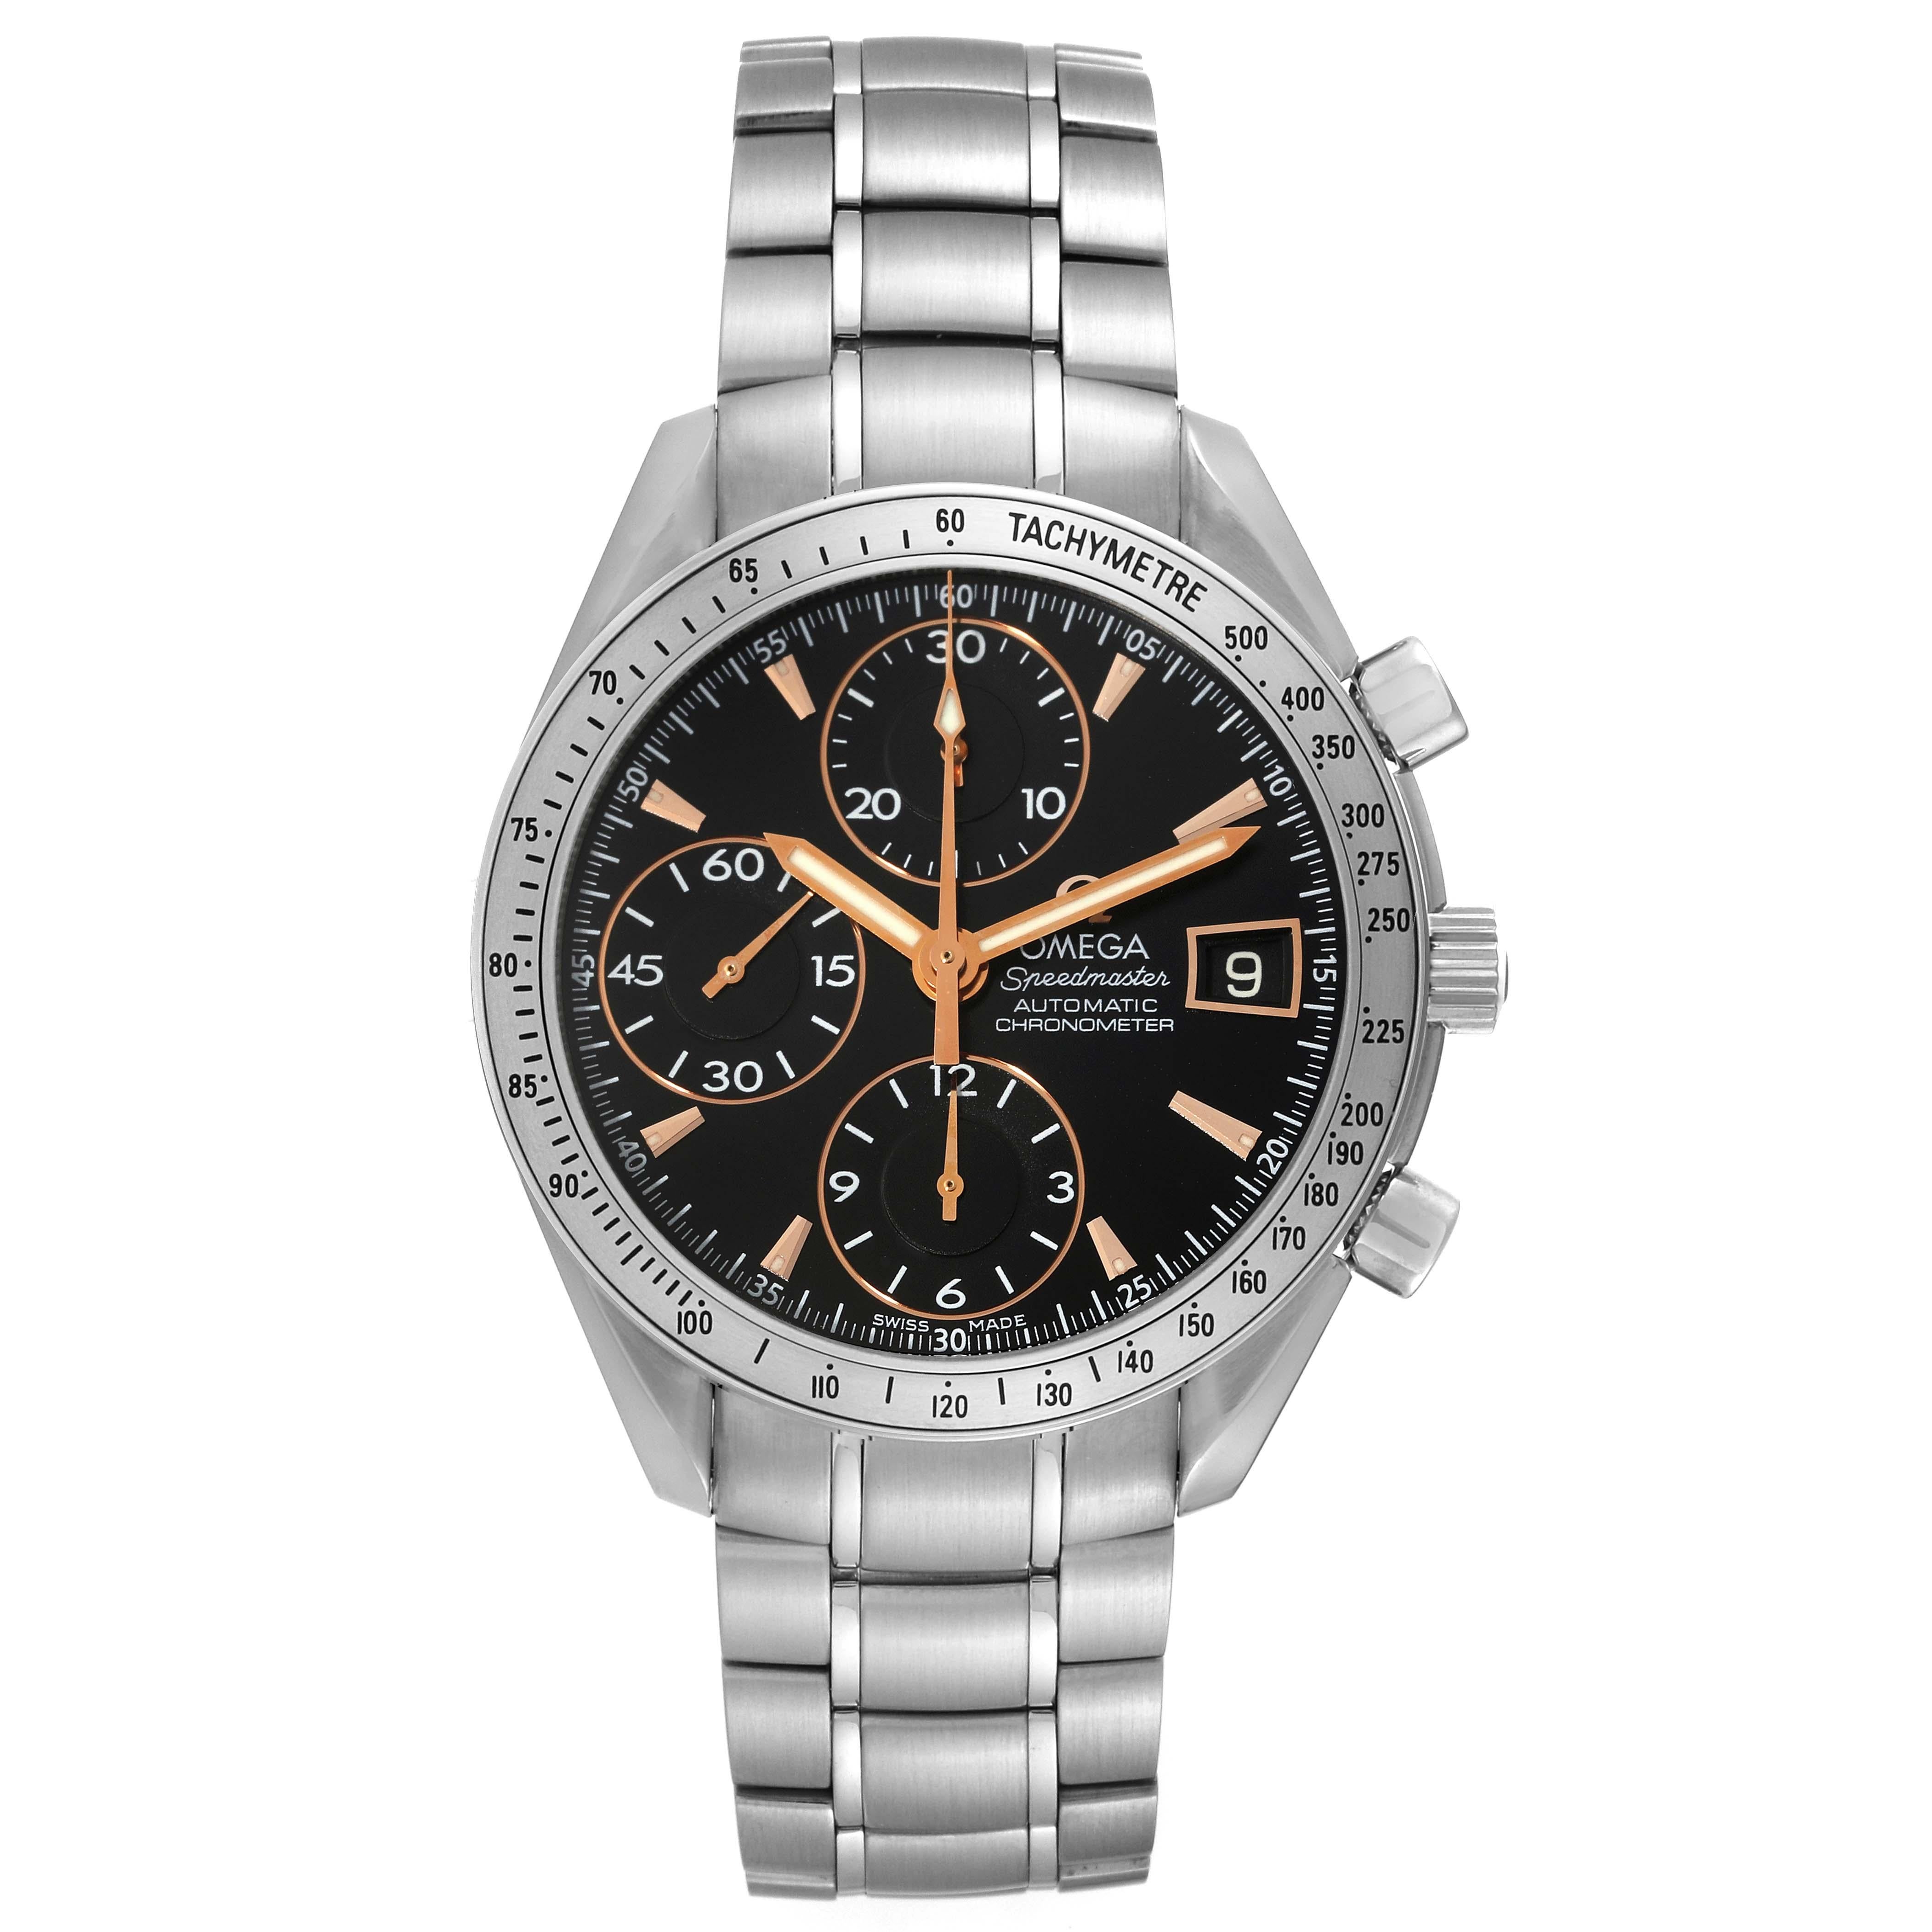 Omega Speedmaster Date Special Edition Steel Mens Watch 3211.50.00. Automatic self-winding chronograph movement. Stainless steel round case 39 mm in diameter. Stainless steel bezel with tachymetric scale. Scratch-resistant sapphire crystal with